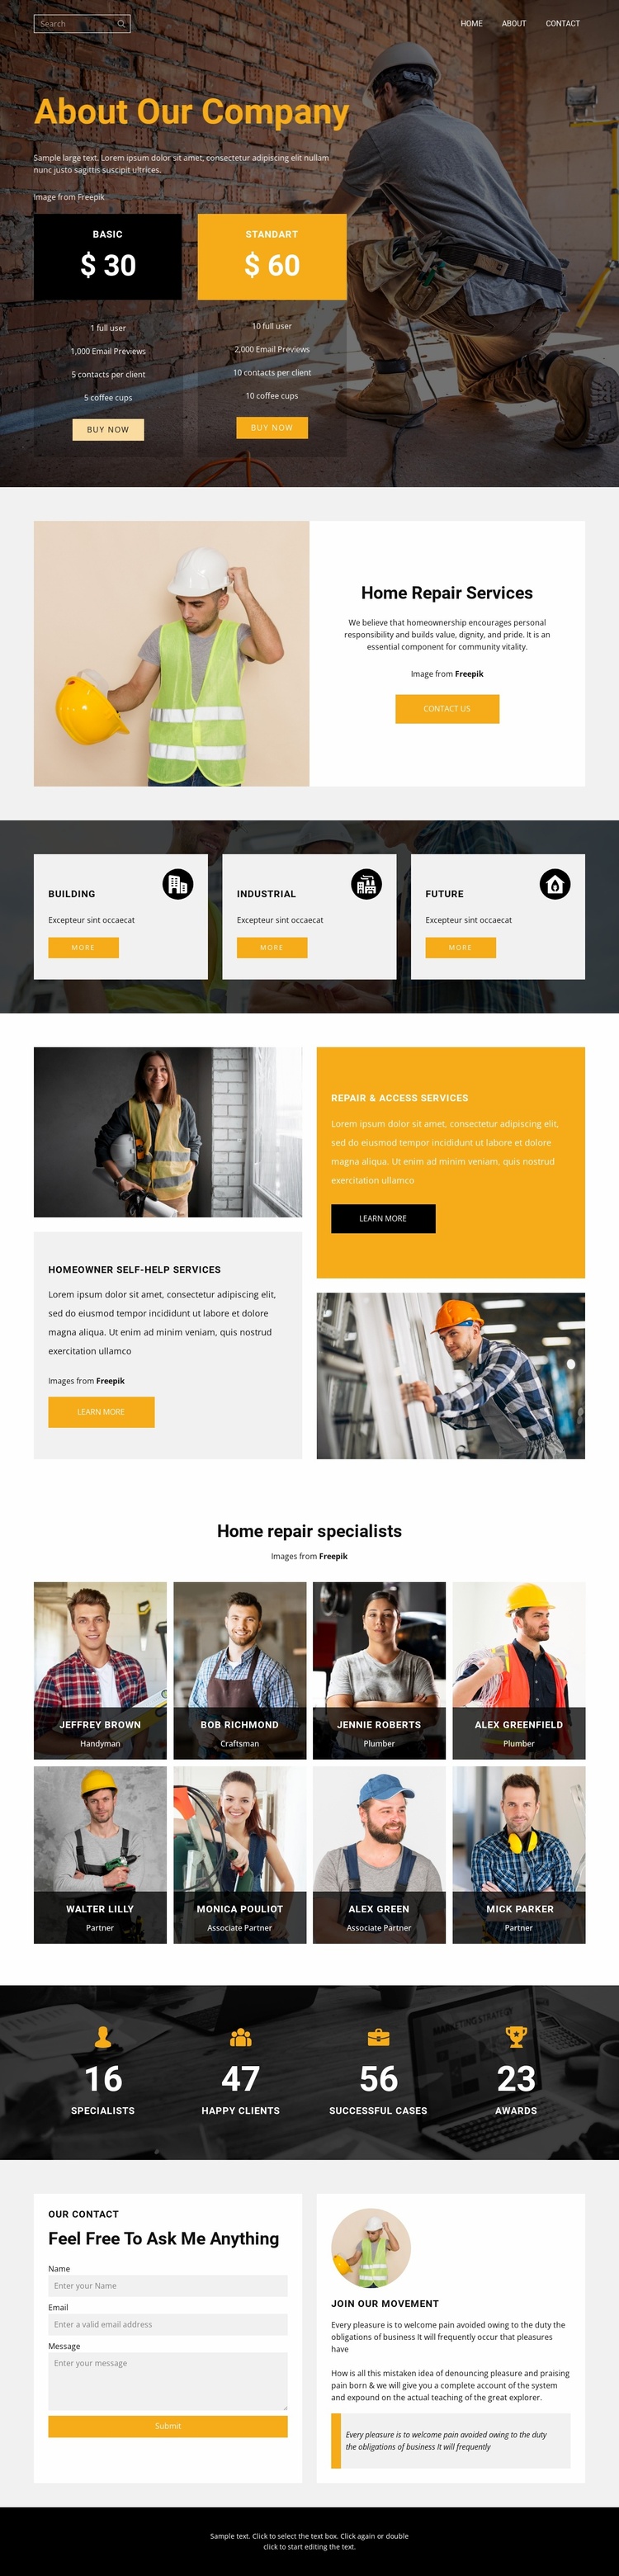 We will build a better home Website Template